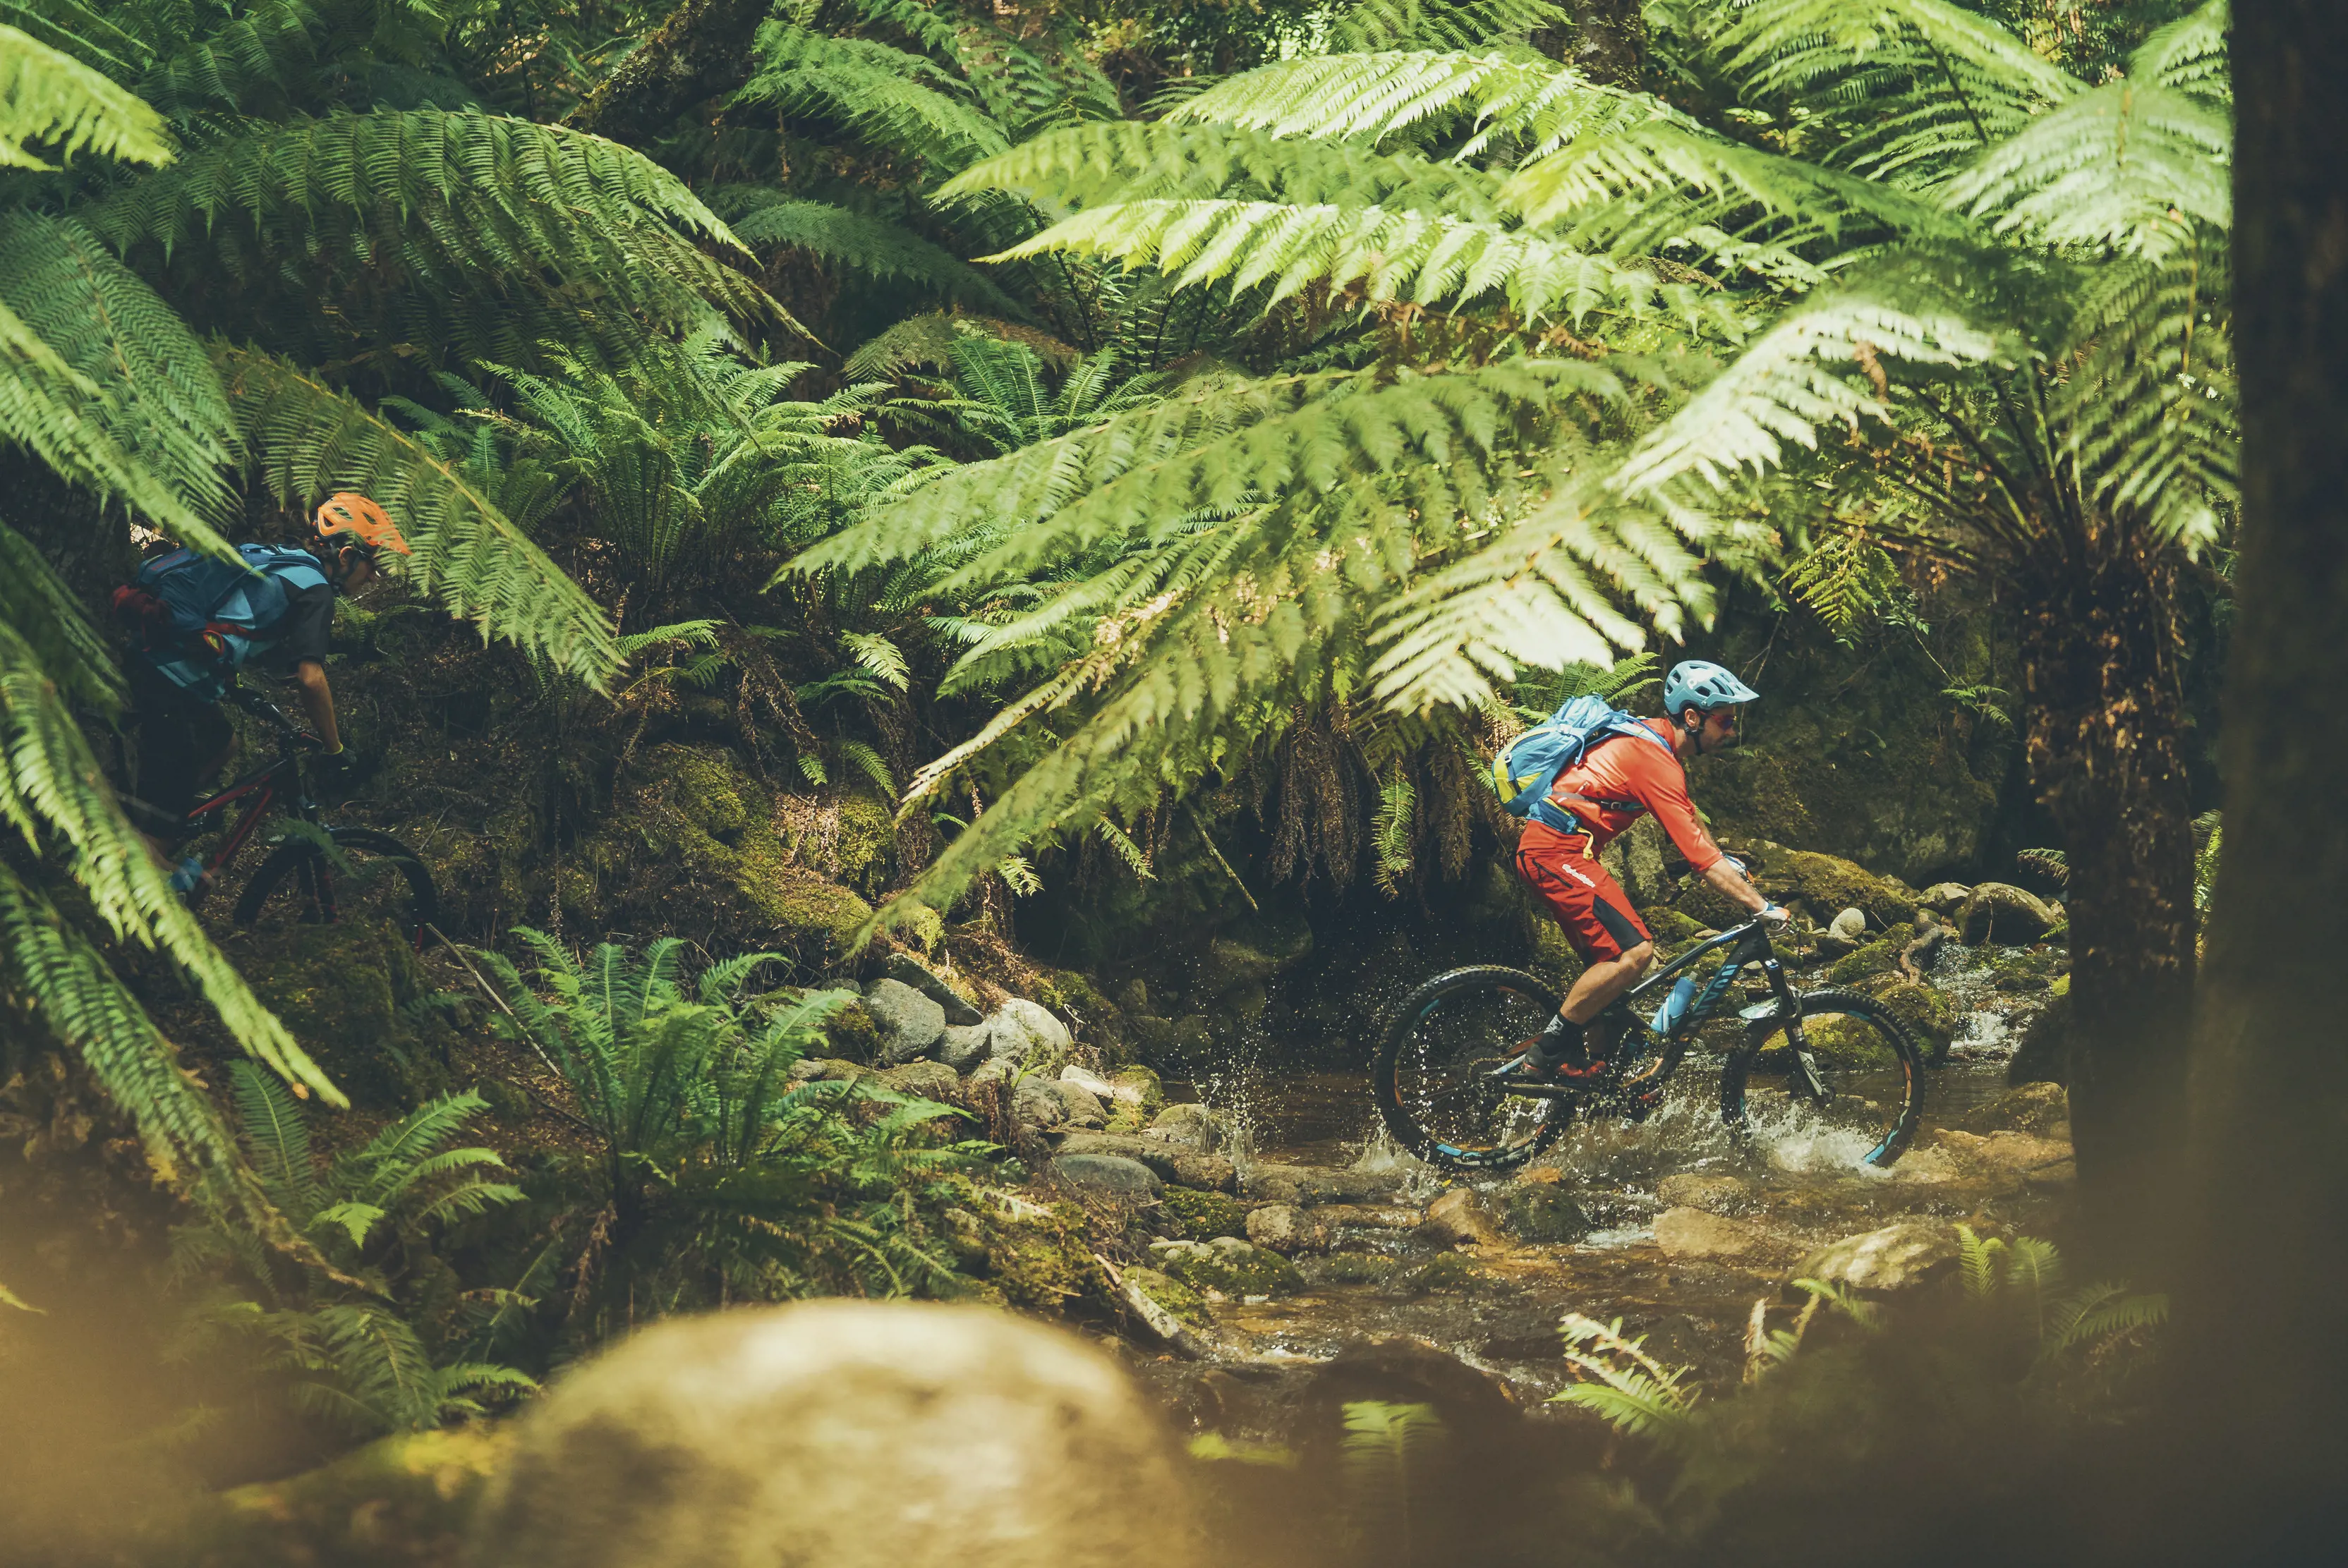 Cyclists ride the Blue Tier Descent on the Blue Derby Mountain Bike Trail, surrounded by rainforest.